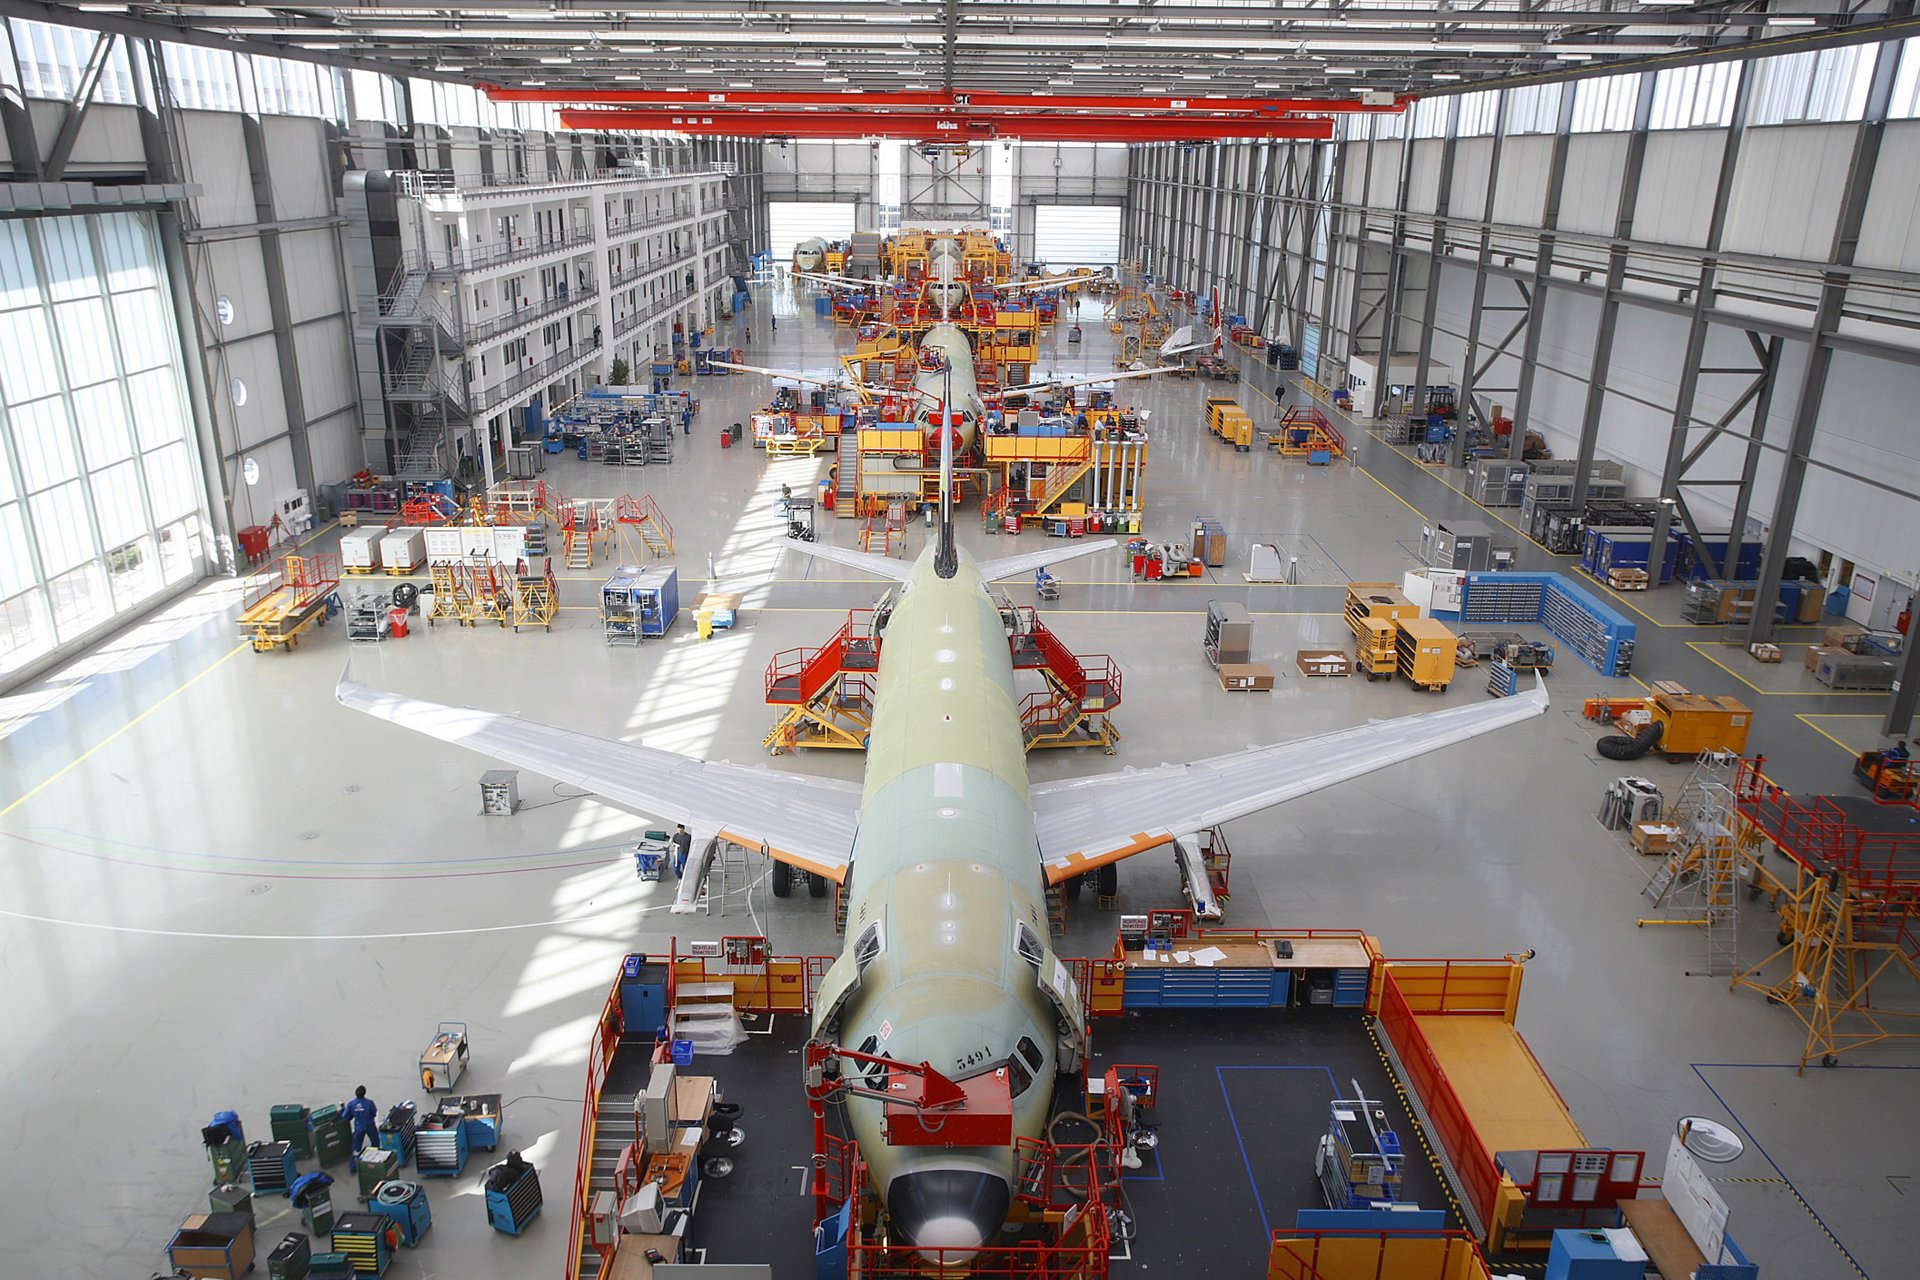 Airbus remains the largest aircraft manufacturer in the world